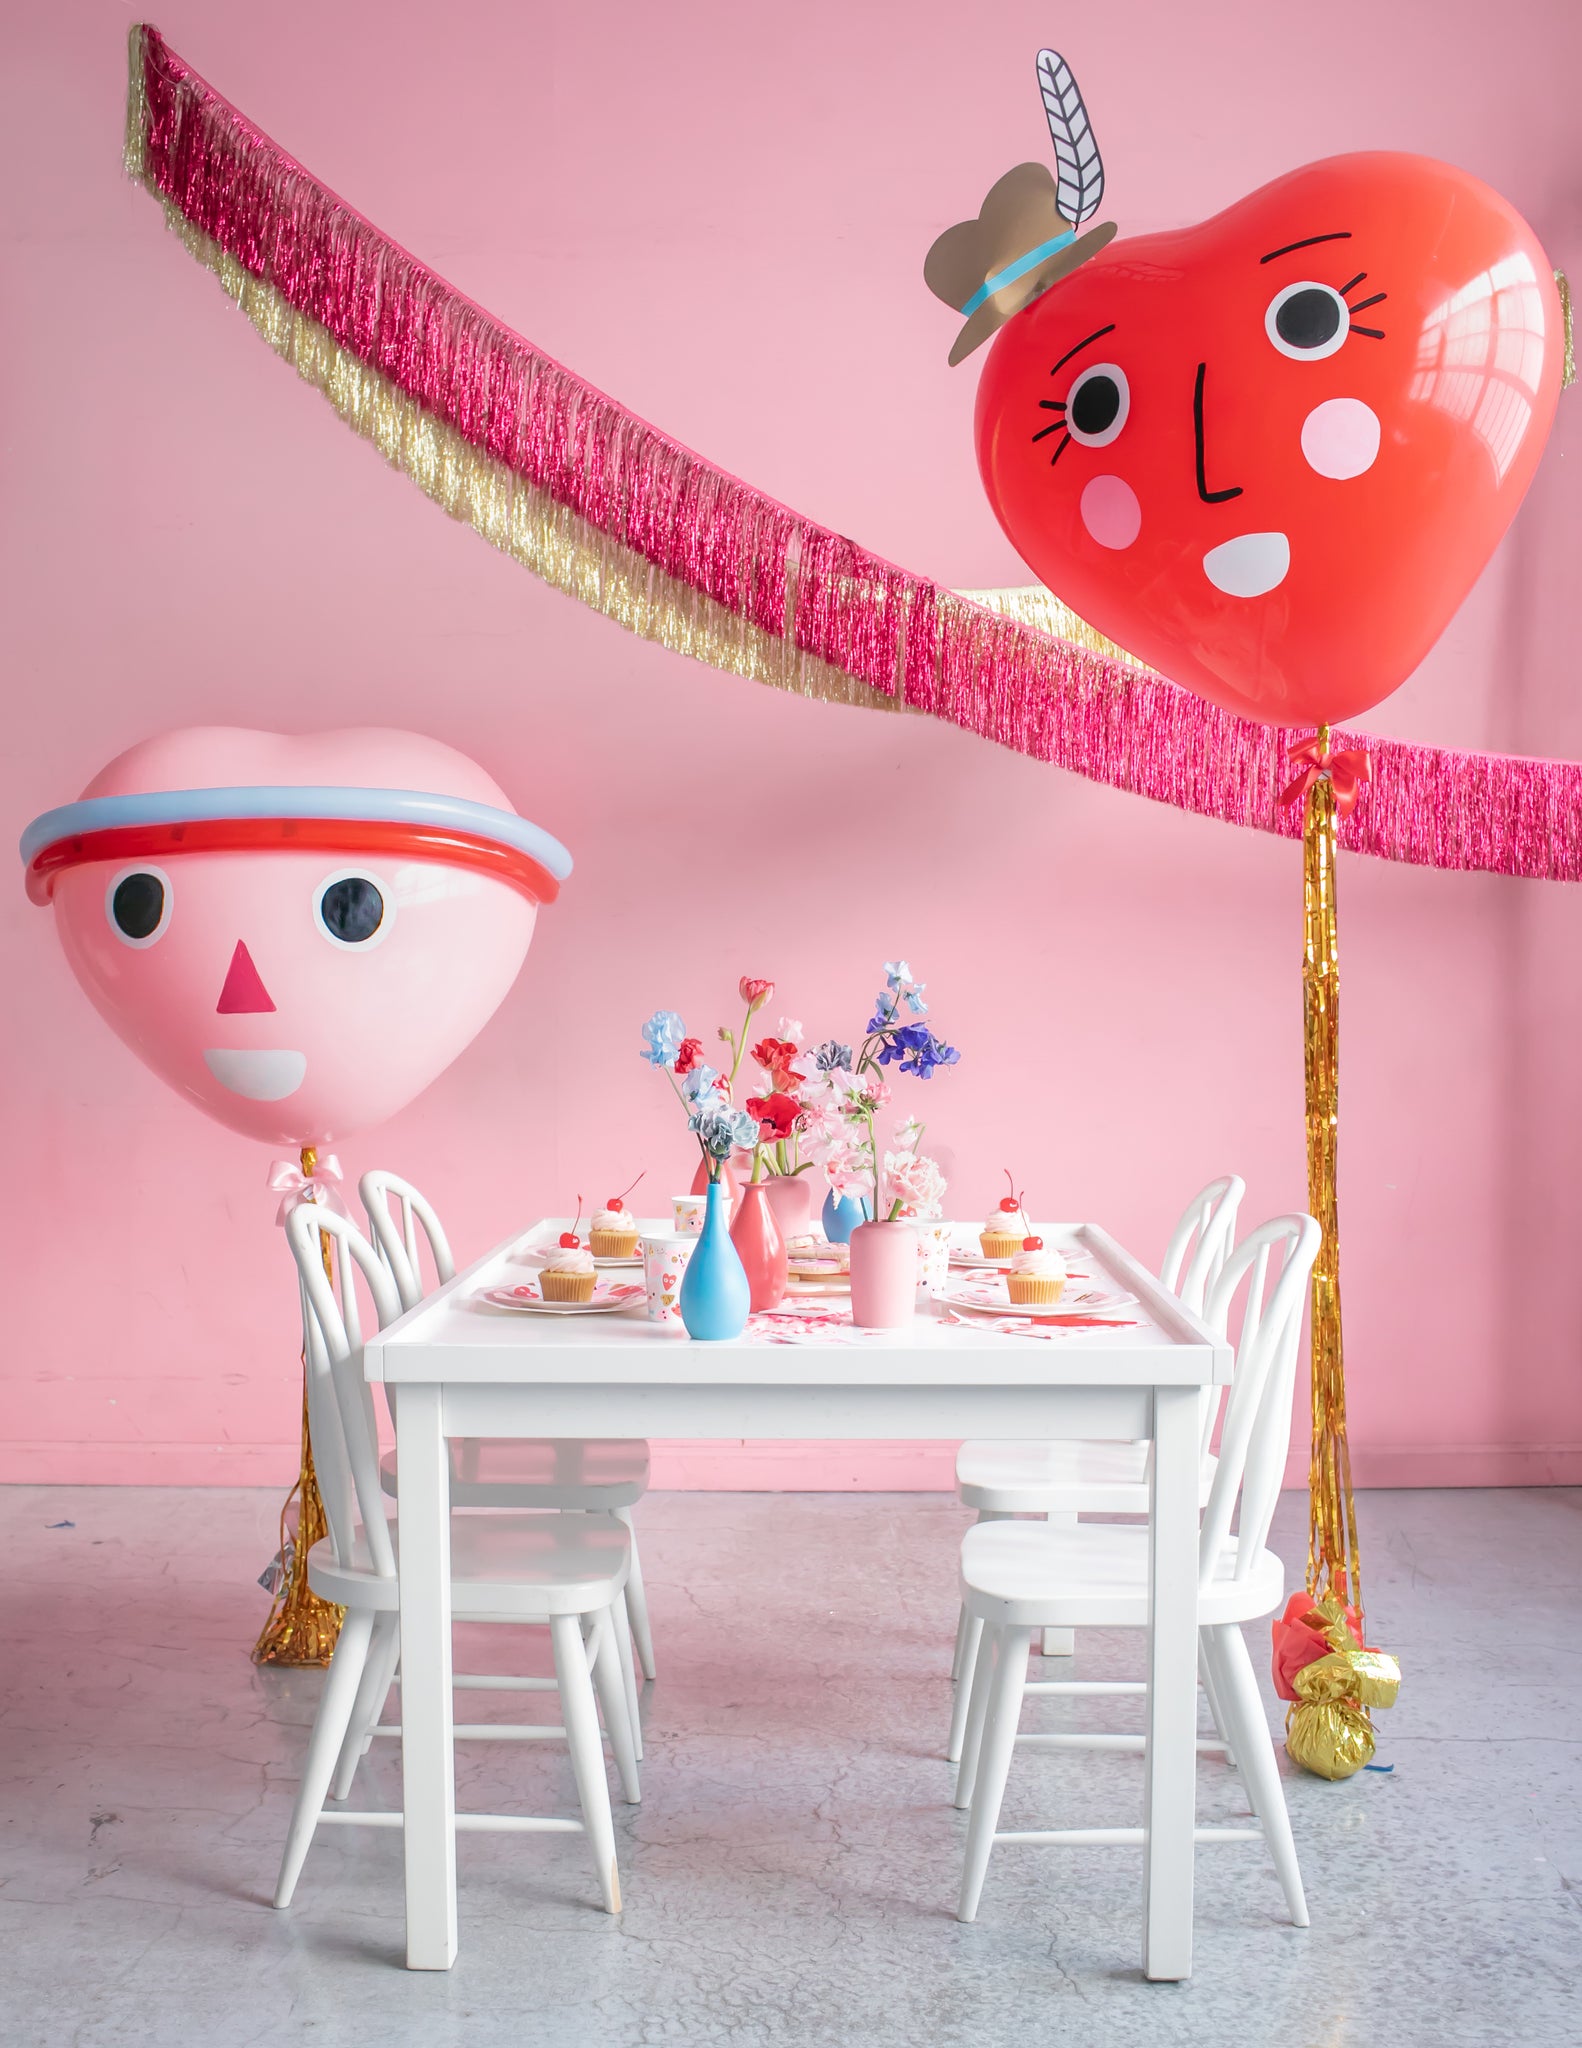 Fun Valentine's Day balloons and garlands for party decorations